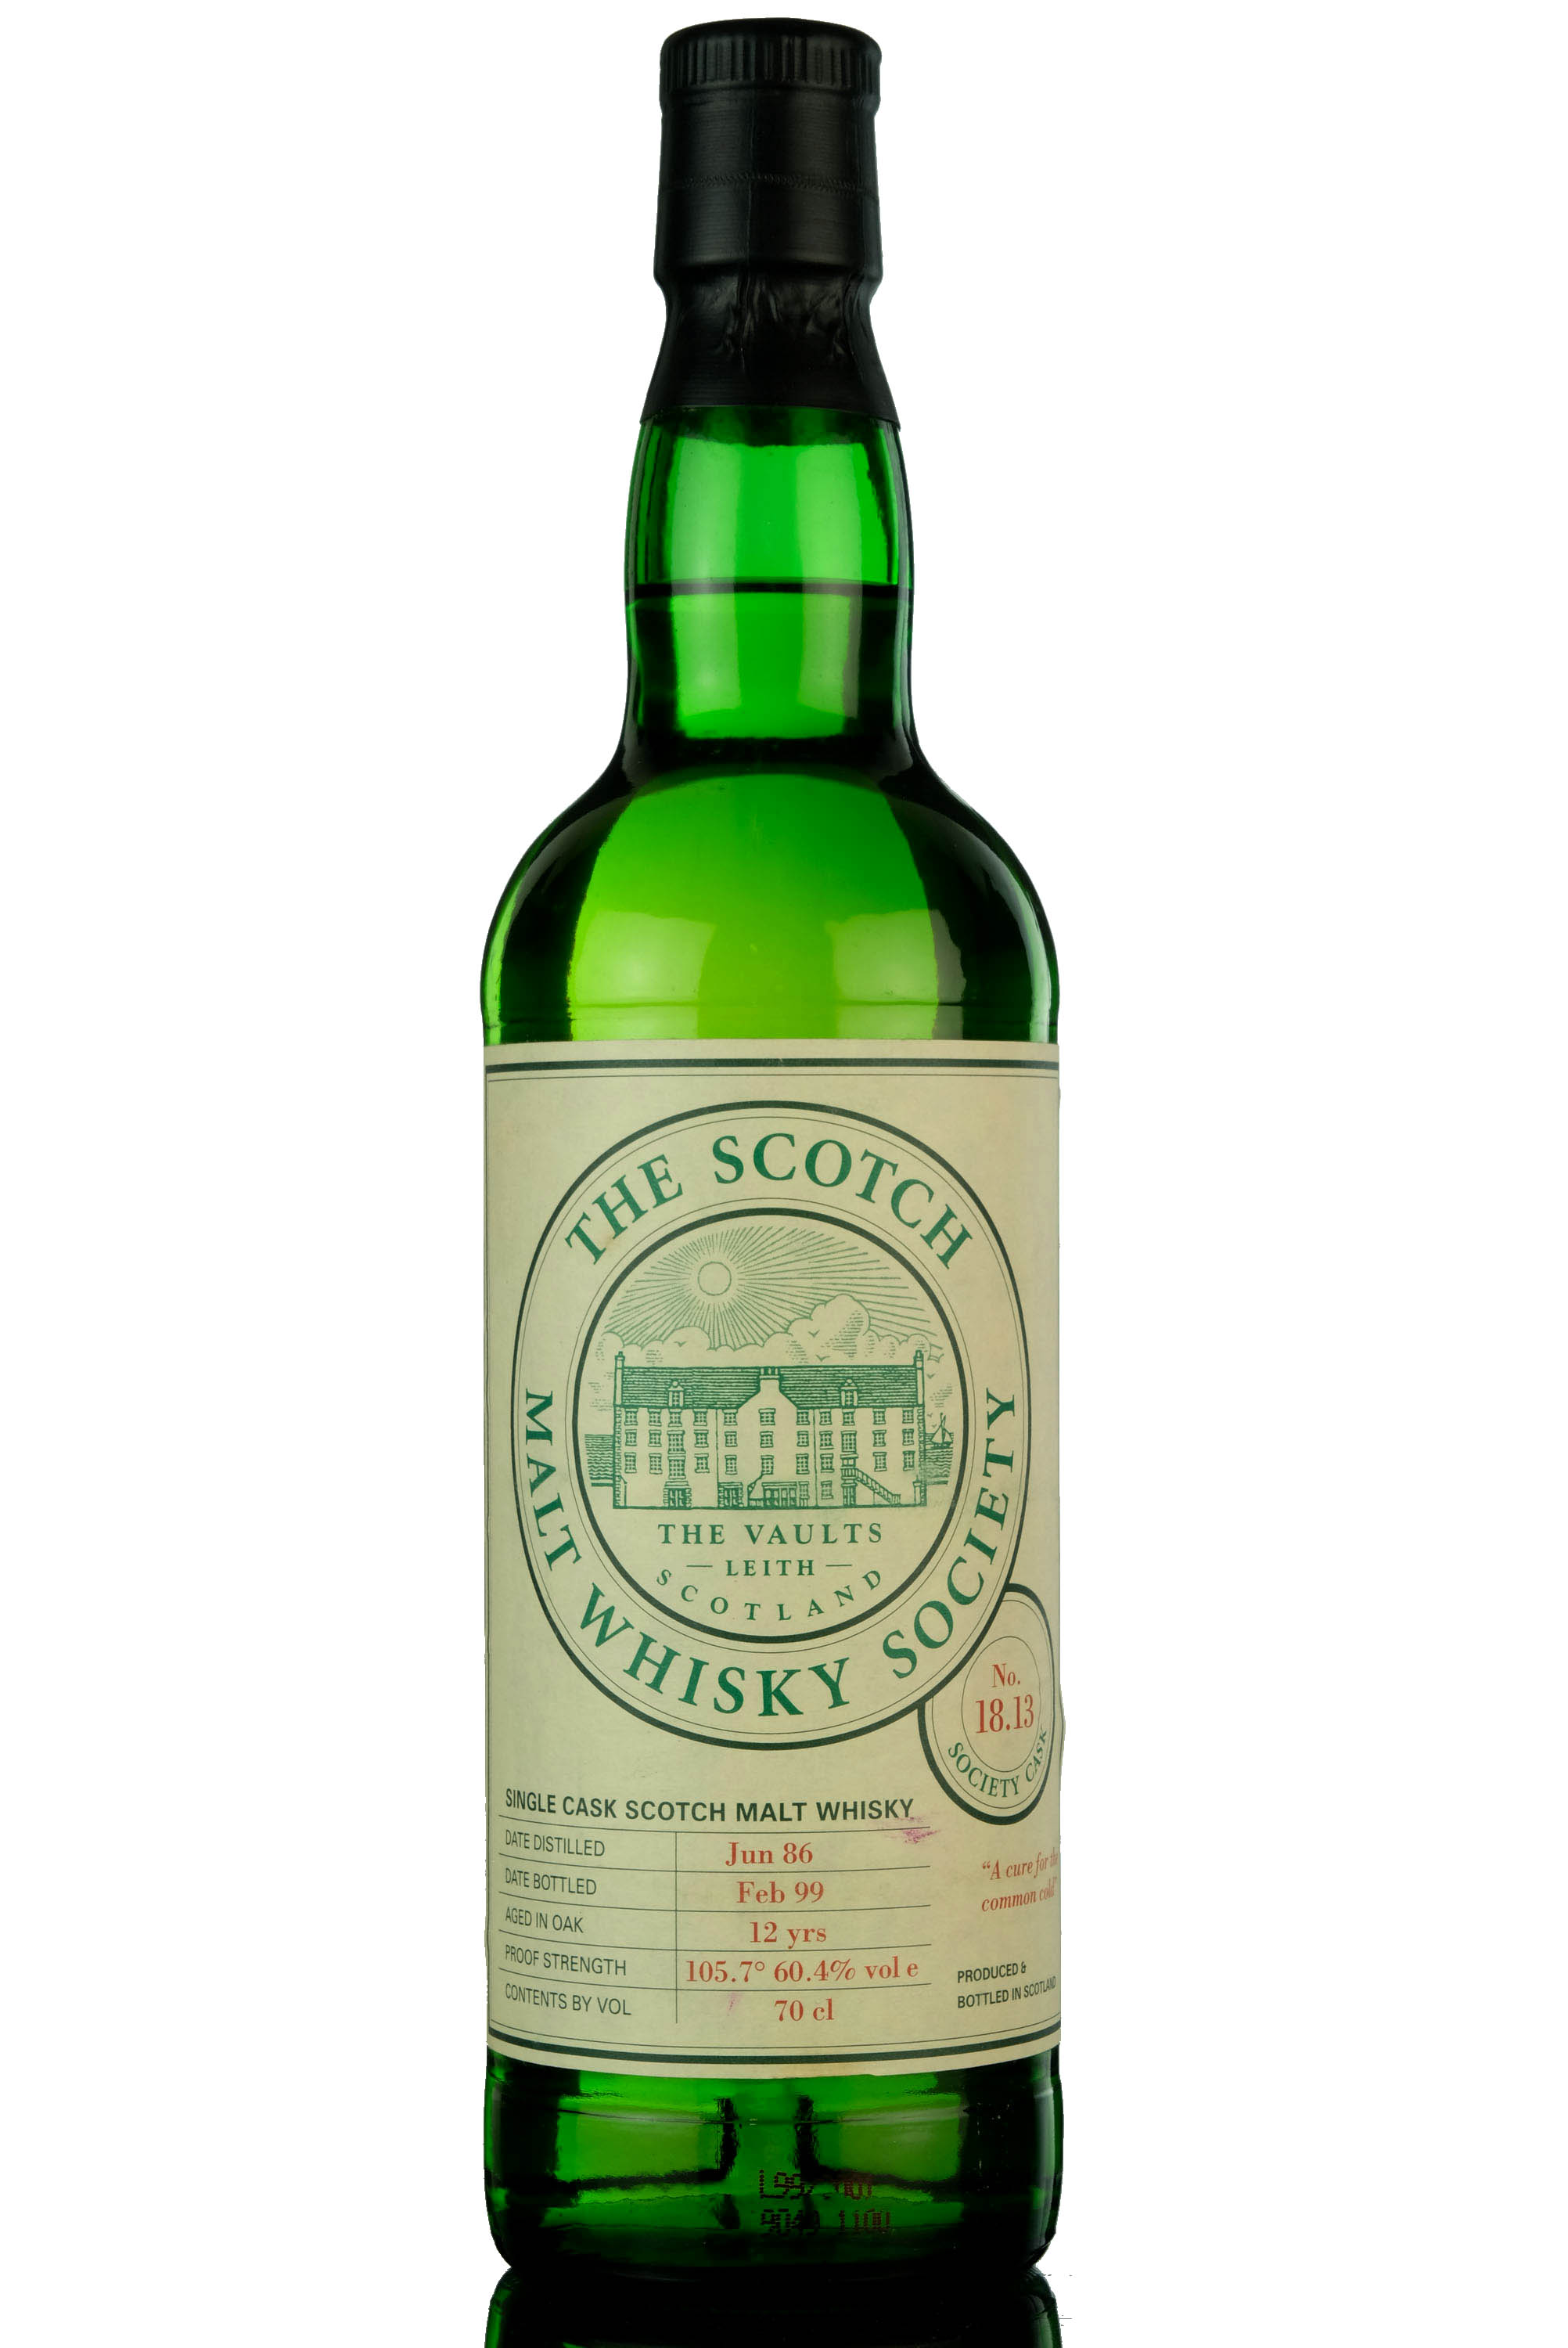 Glenrothes 1989-1999 - 10 Year Old - SMWS 30.27